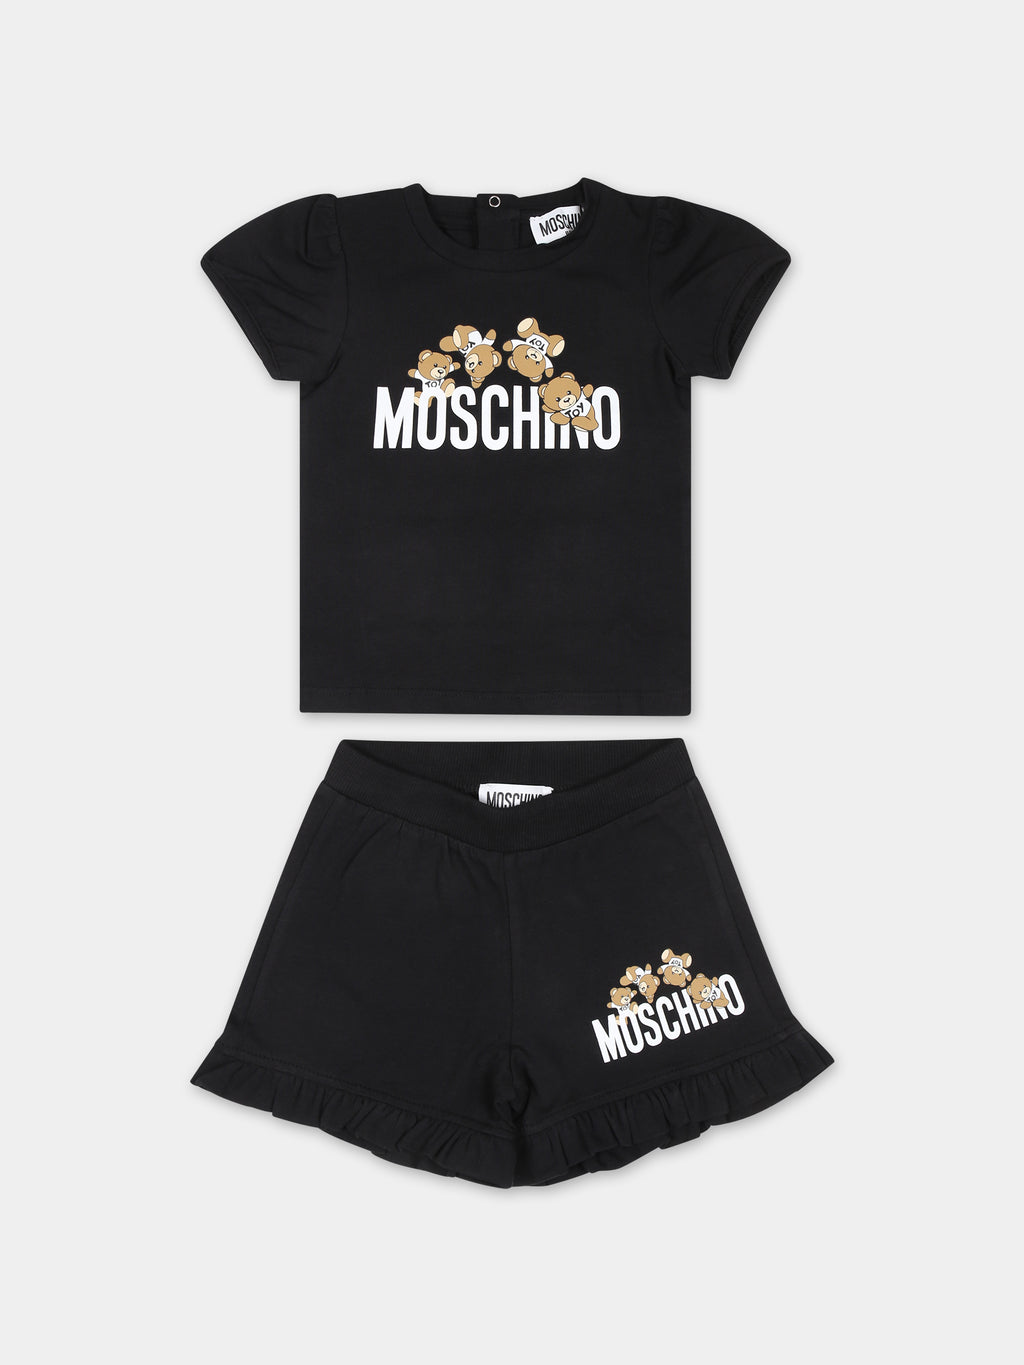 Black suit for baby girl with Teddy Bears and logo